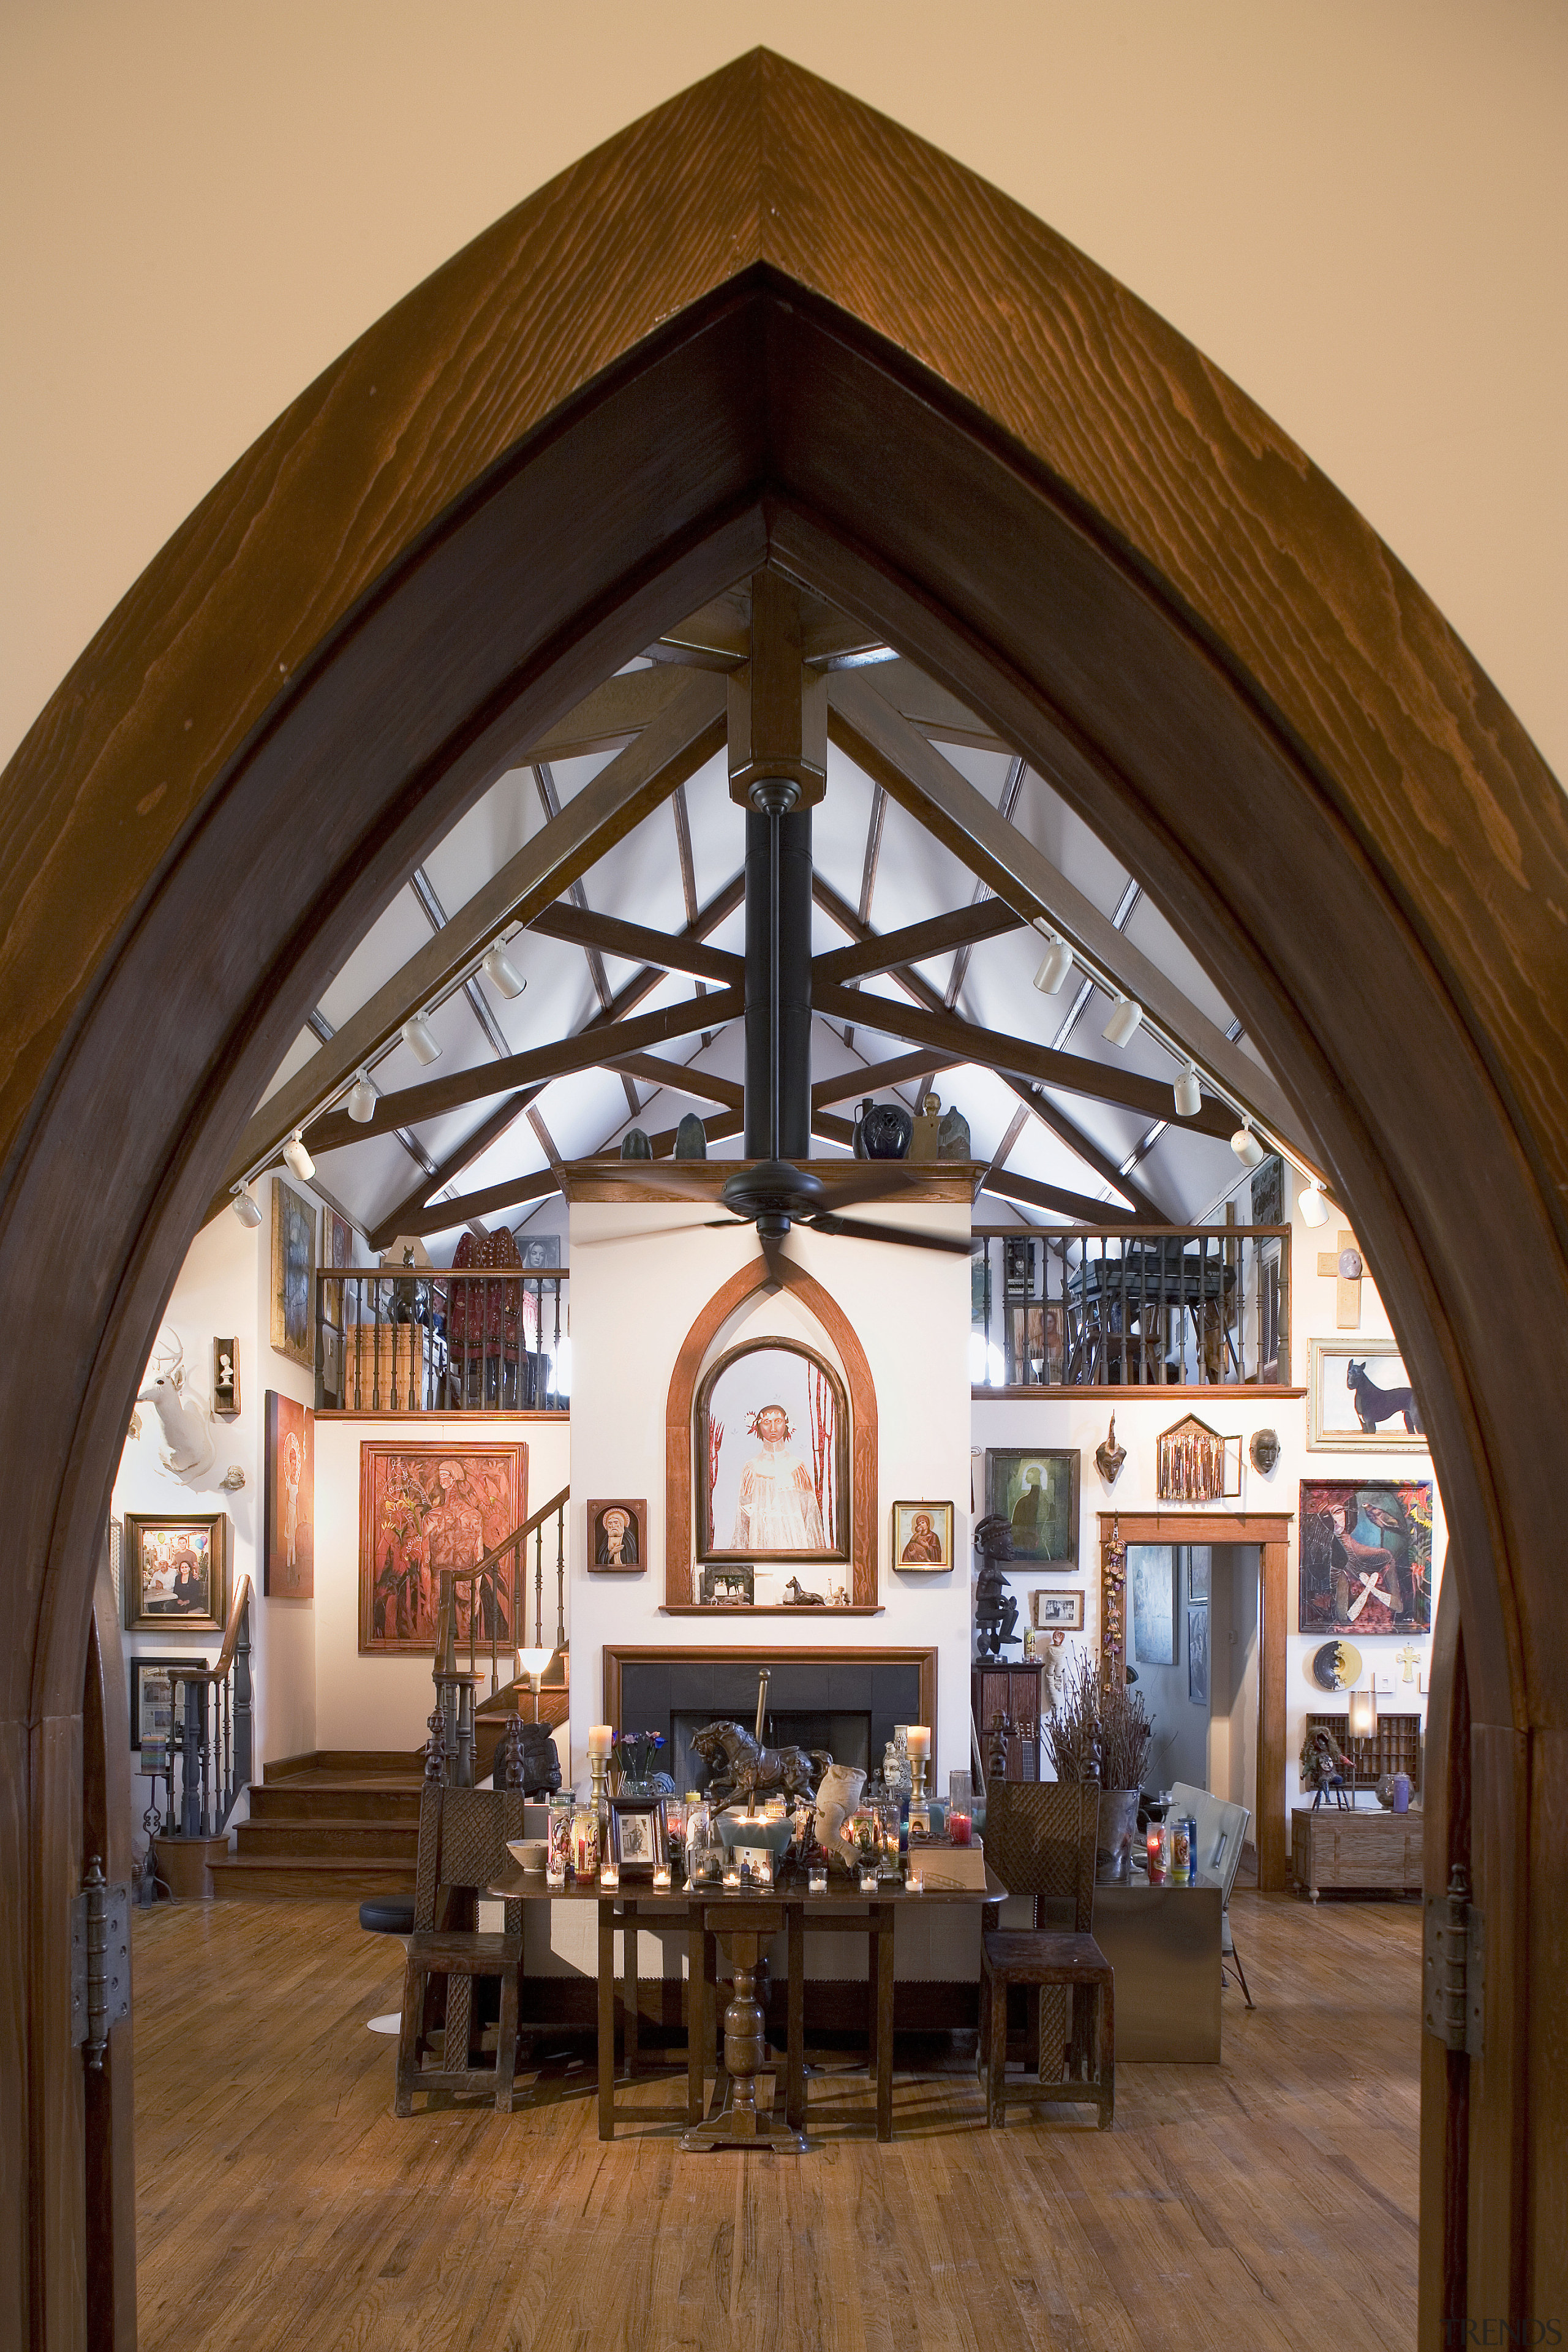 View of an arch-way looking into the main arch, interior design, window, wood, brown